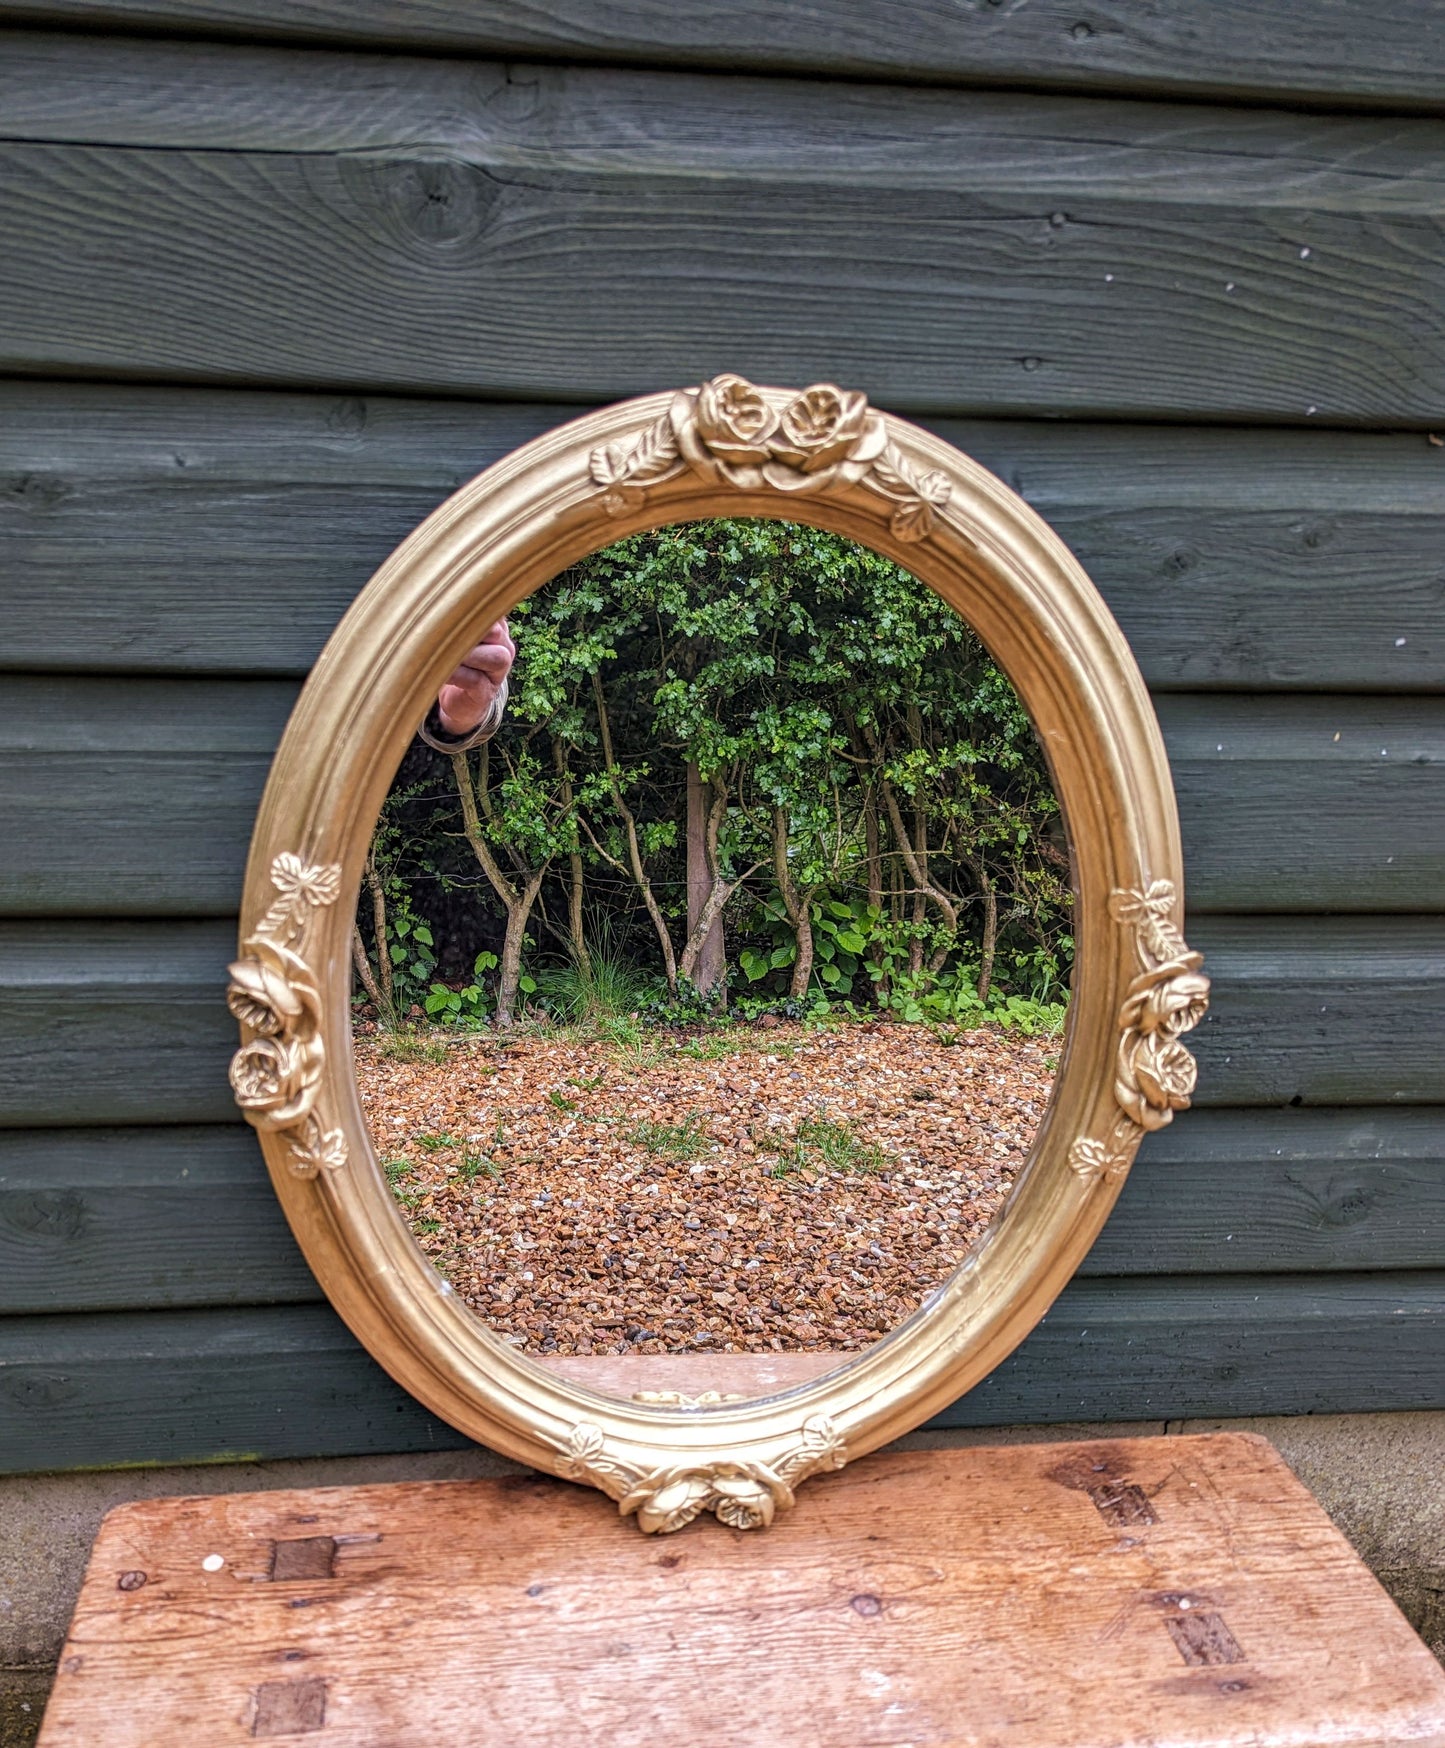 French ANTIQUE ROSE OVAL GILDED MIRROR